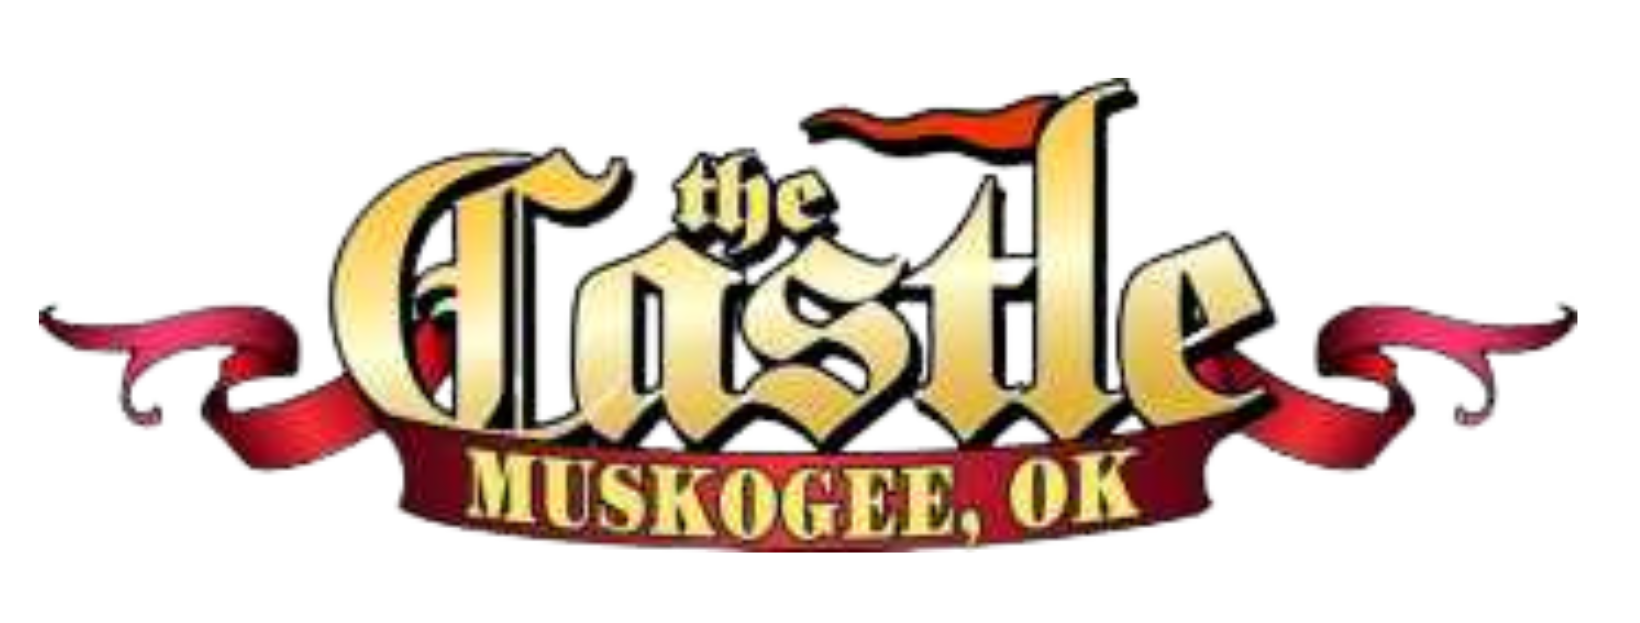 The Castle of Muskogee 